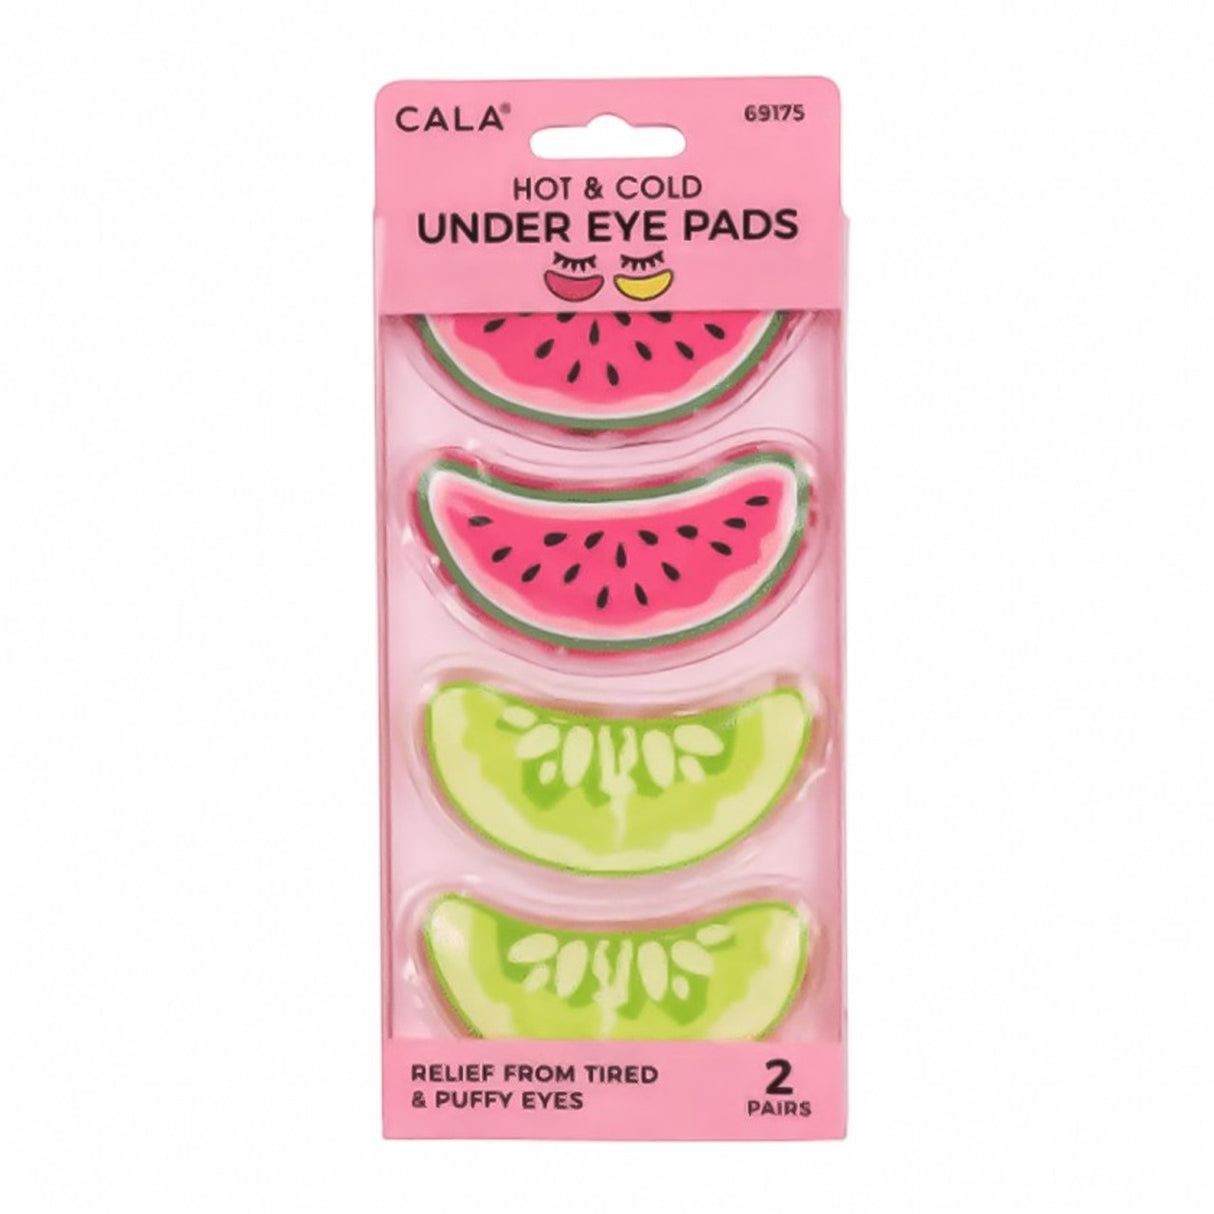 CALA Hot & Cold Under Eye Pads